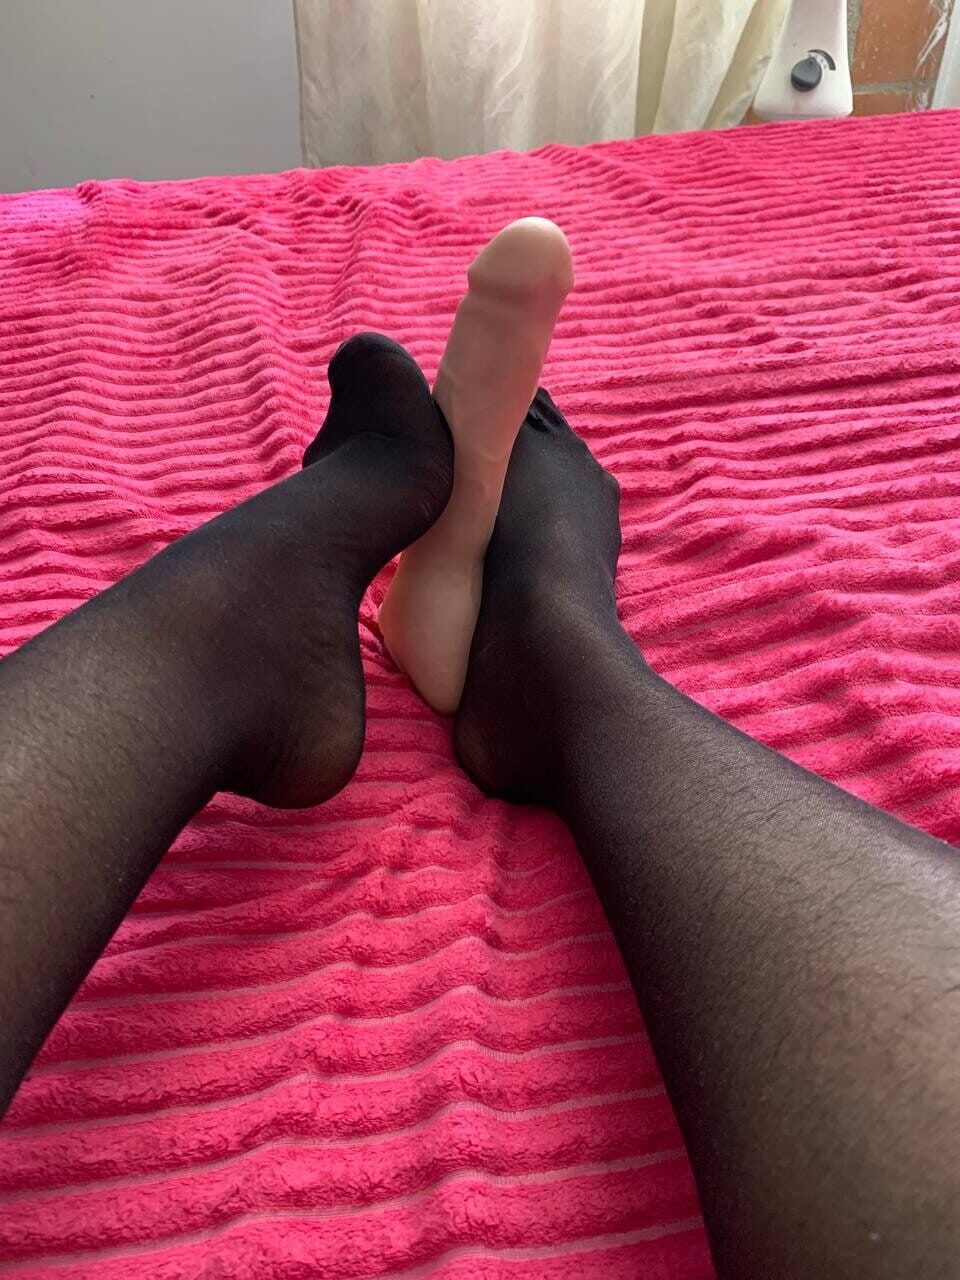 I want you to eat my beautiful feet  #5